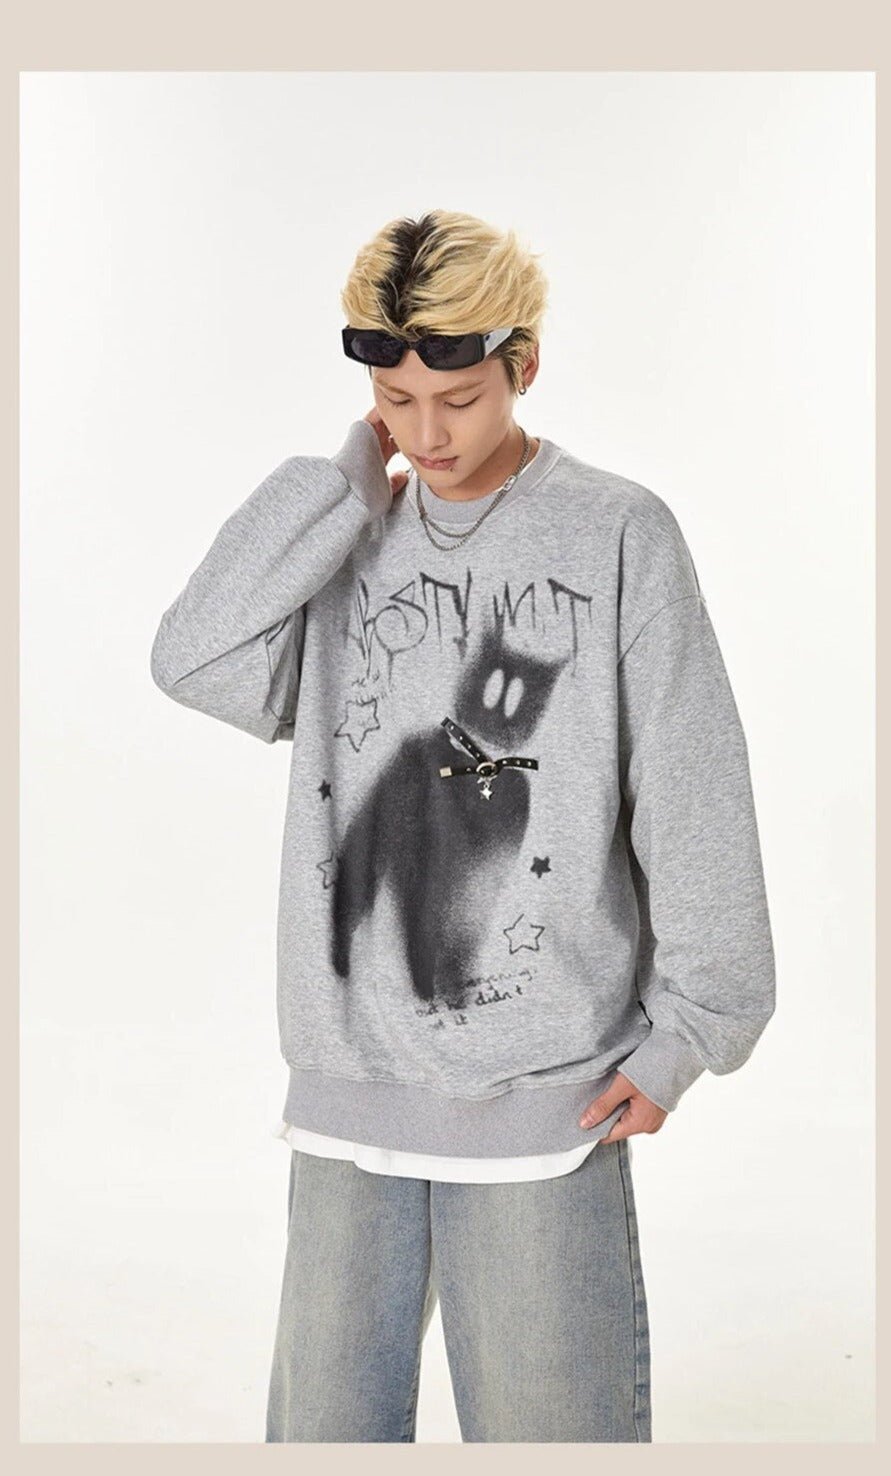 Silhouette Of A Cat Print Sweater